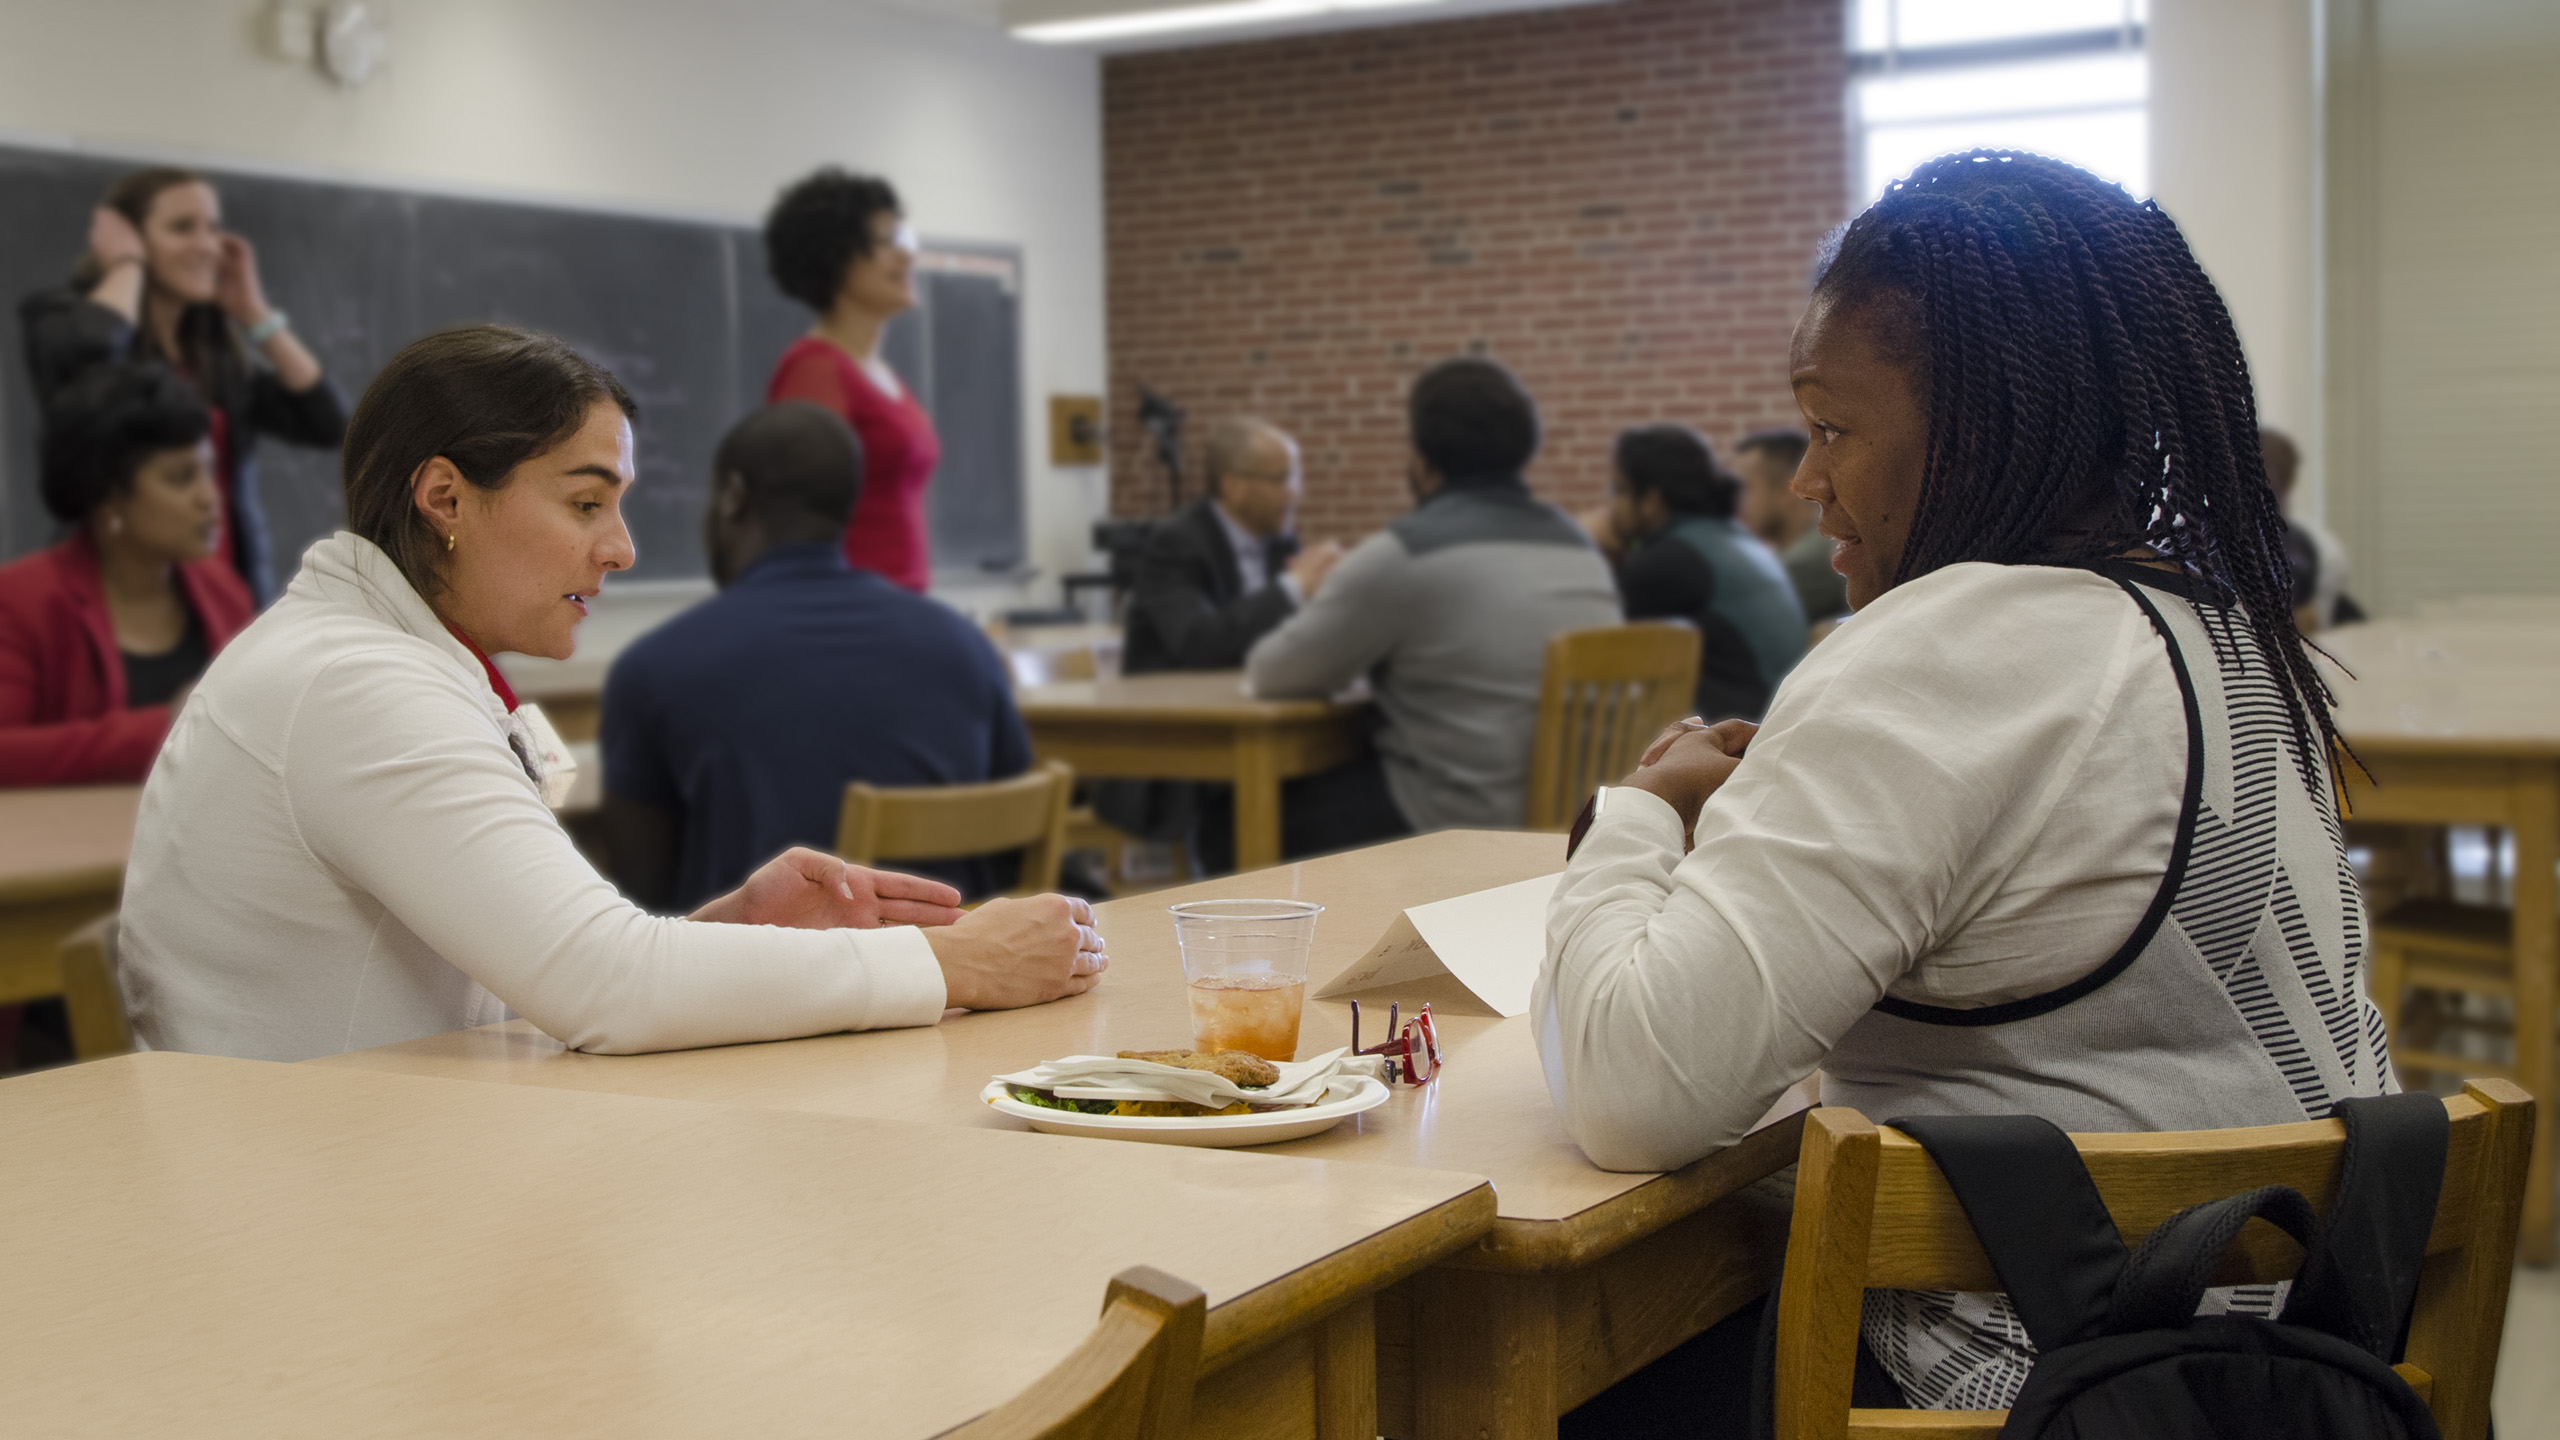 A grad student sitting at a classroom table talking with a prospective student.